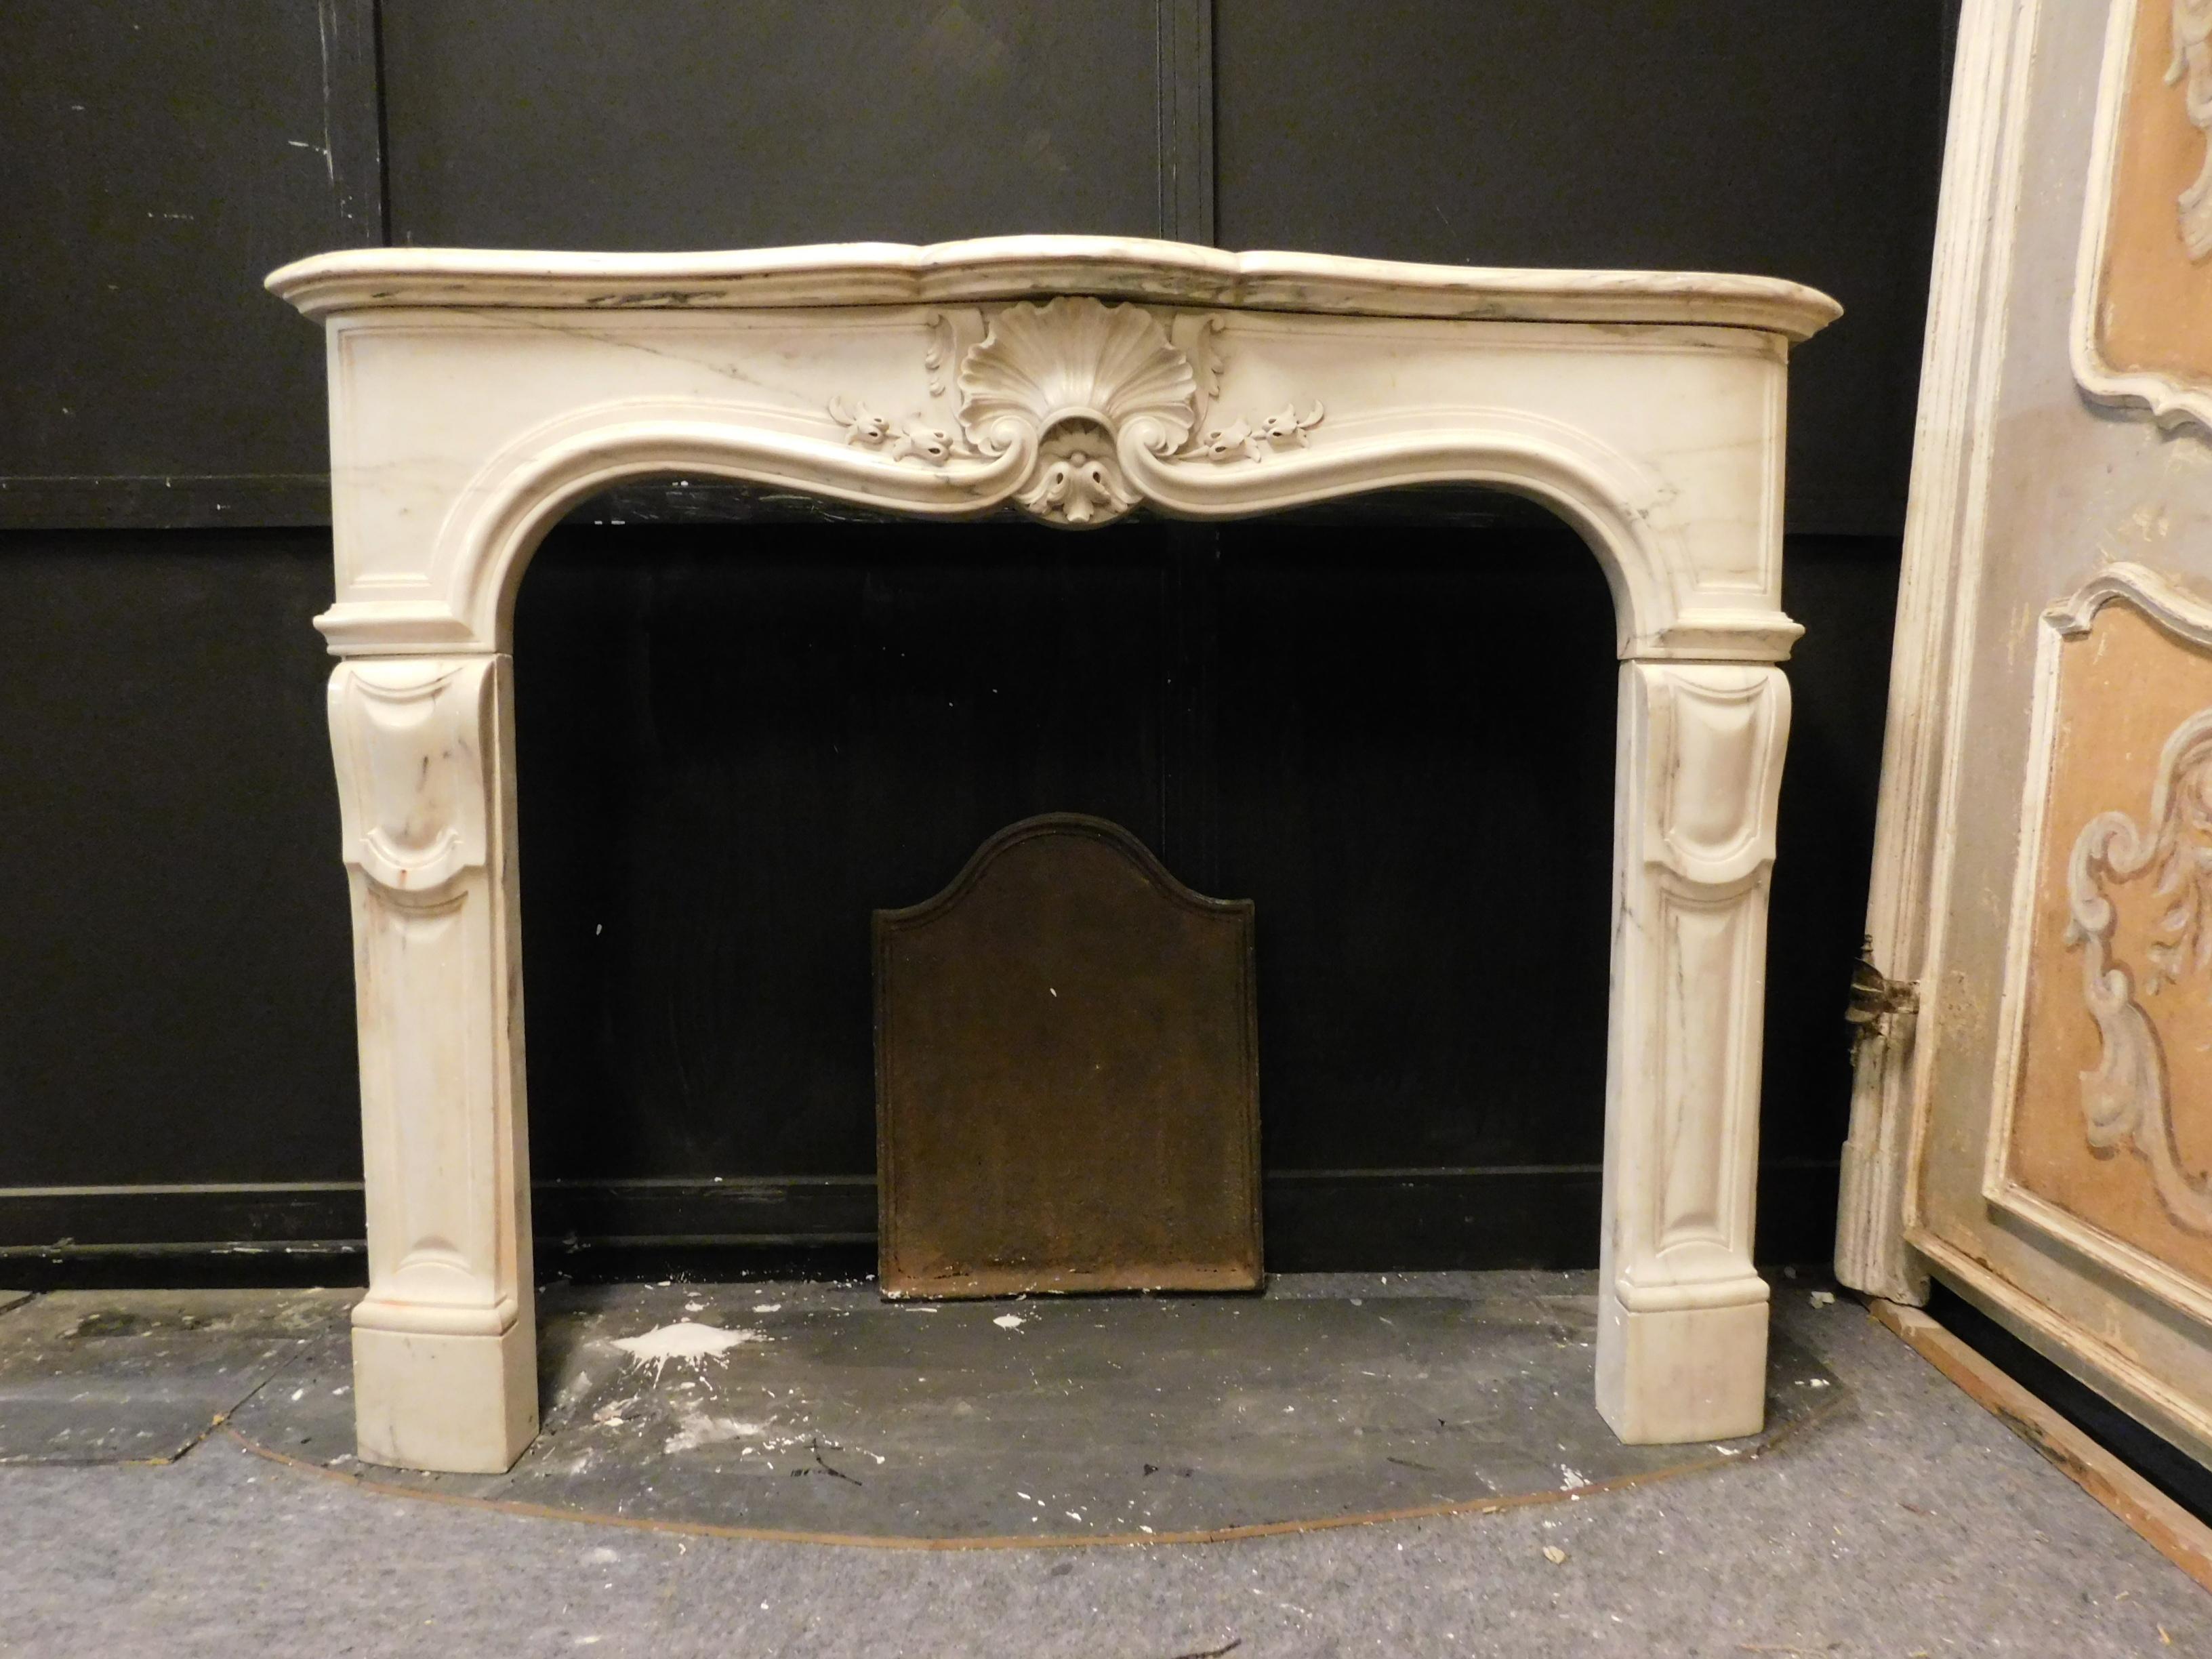 Antique and elegant mantel fireplace, hand-carved in white Carrara marble, with Louis XV style, built and hand-sculpted in the first half of the 18th century, from a noble palace in France, maximum external size cm W 147 x H 111 x T 44, internal